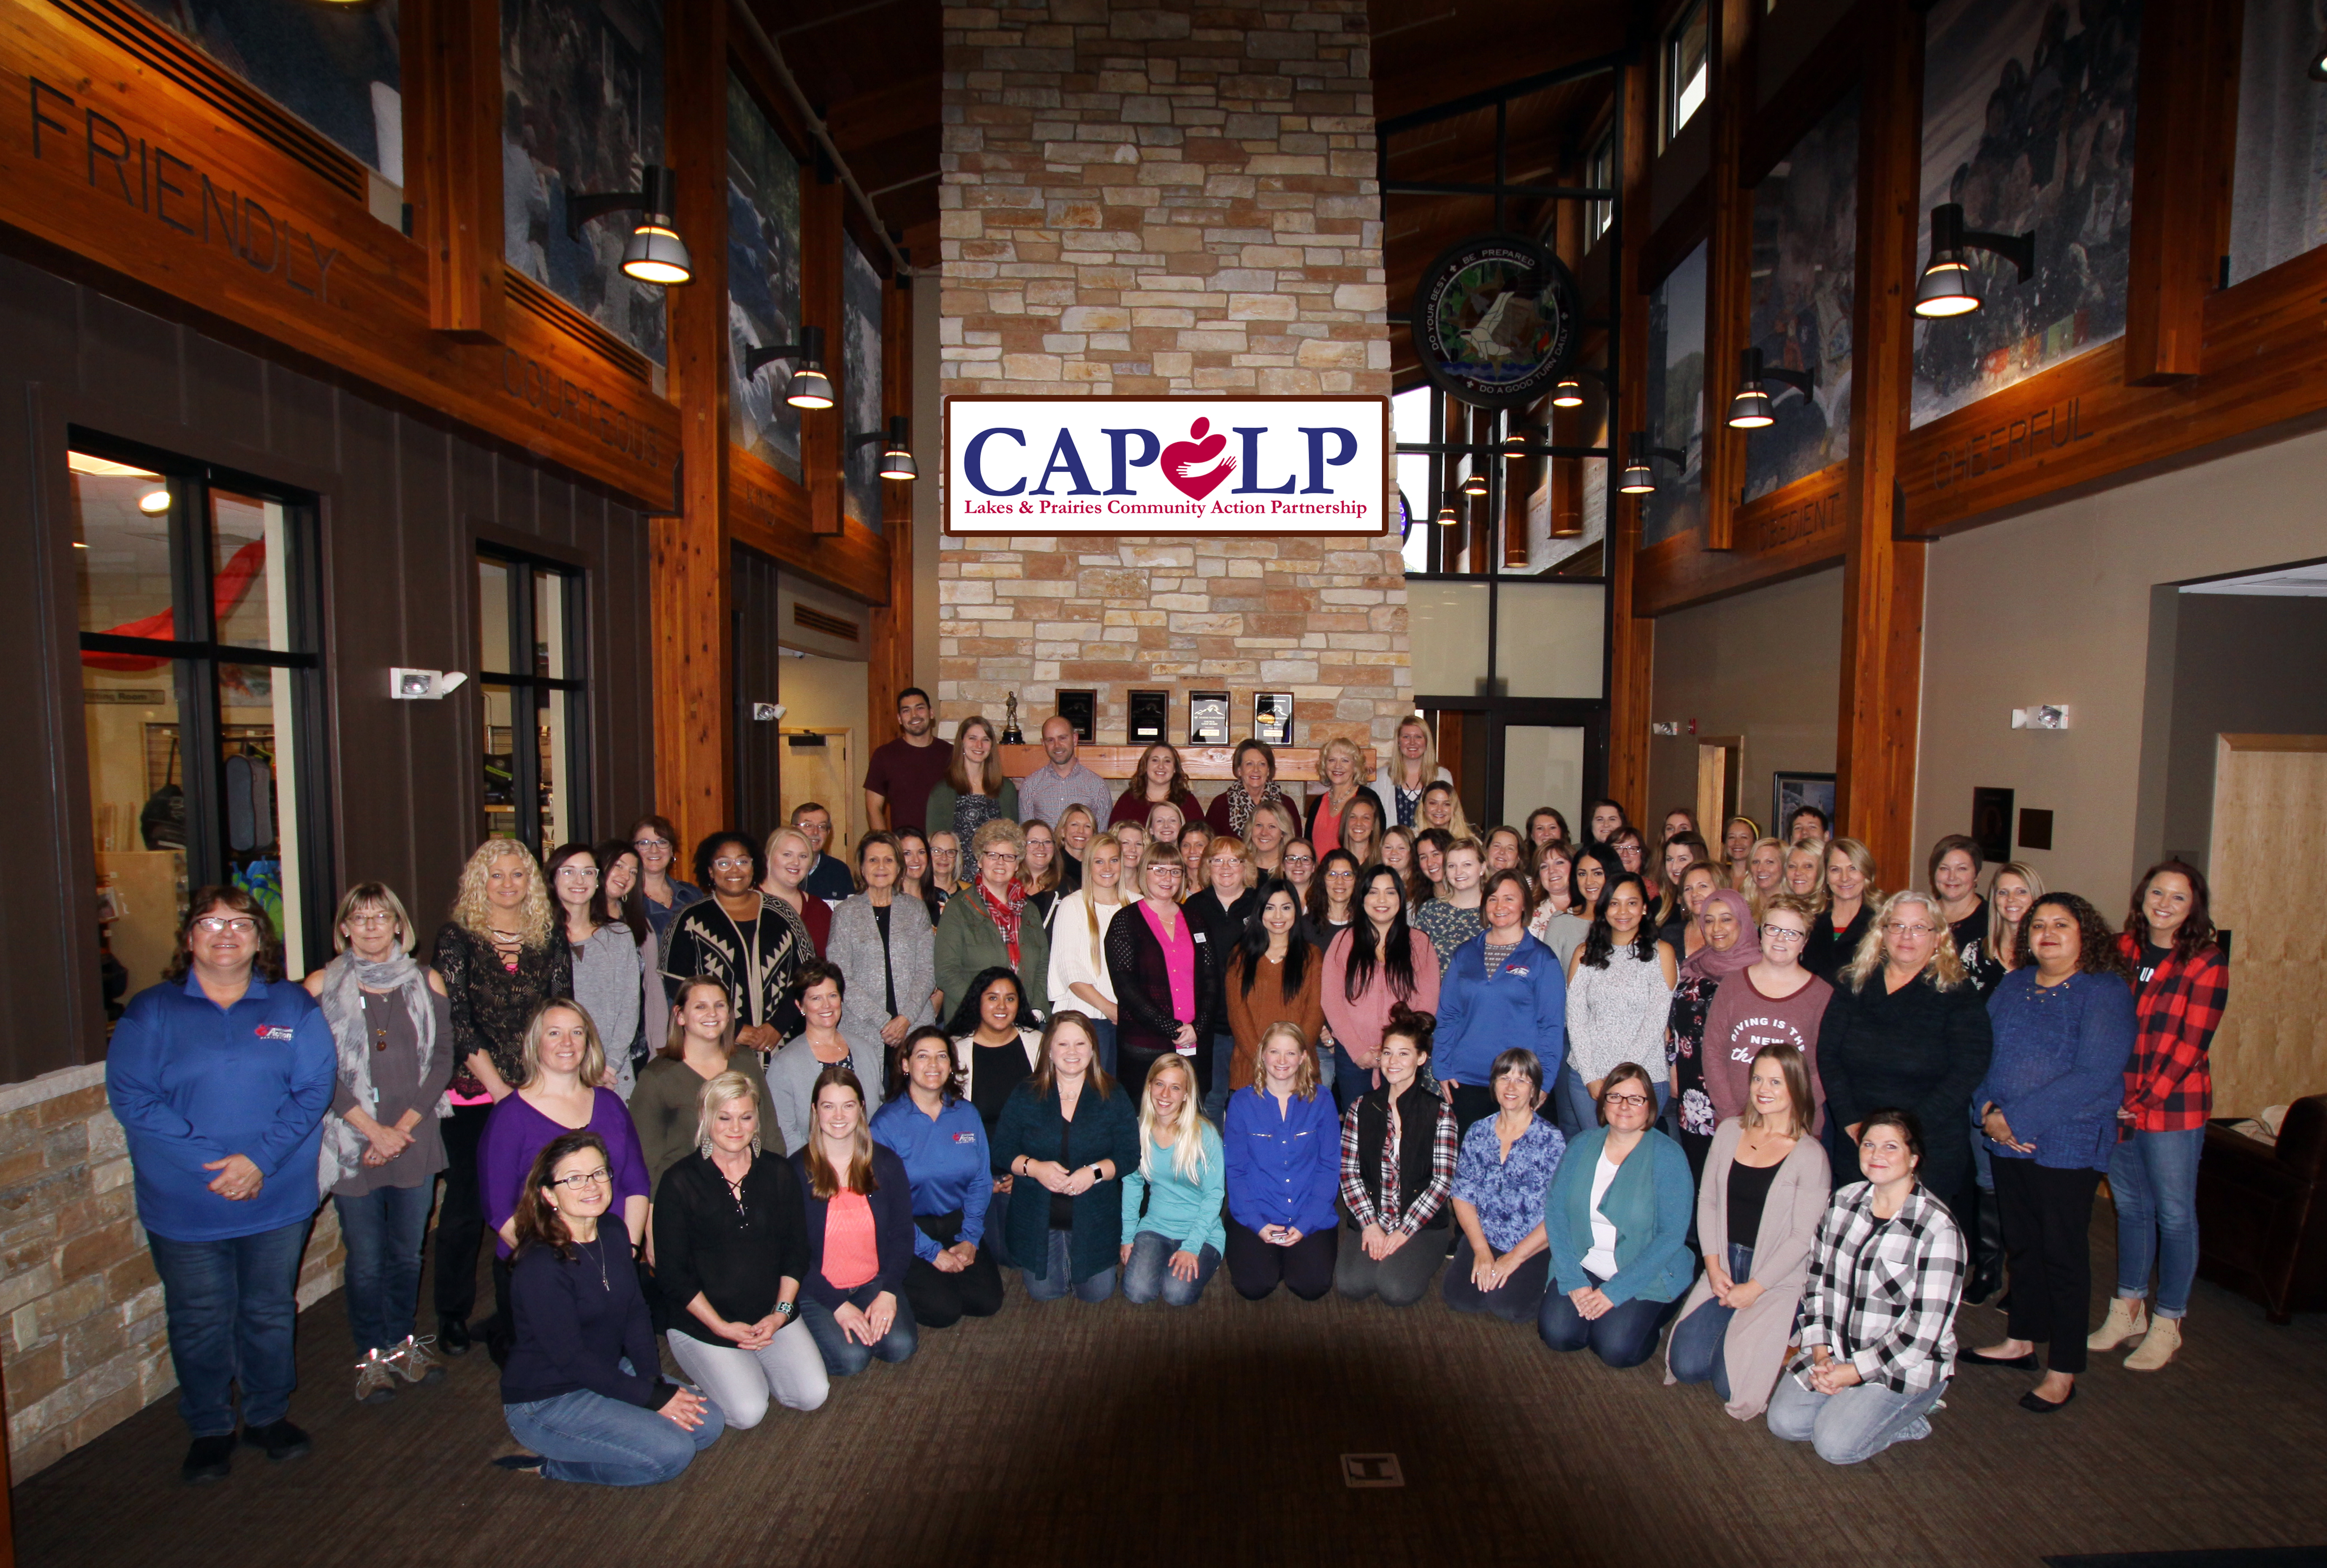 2021 Not-for-Profit of the Year: CAPLP